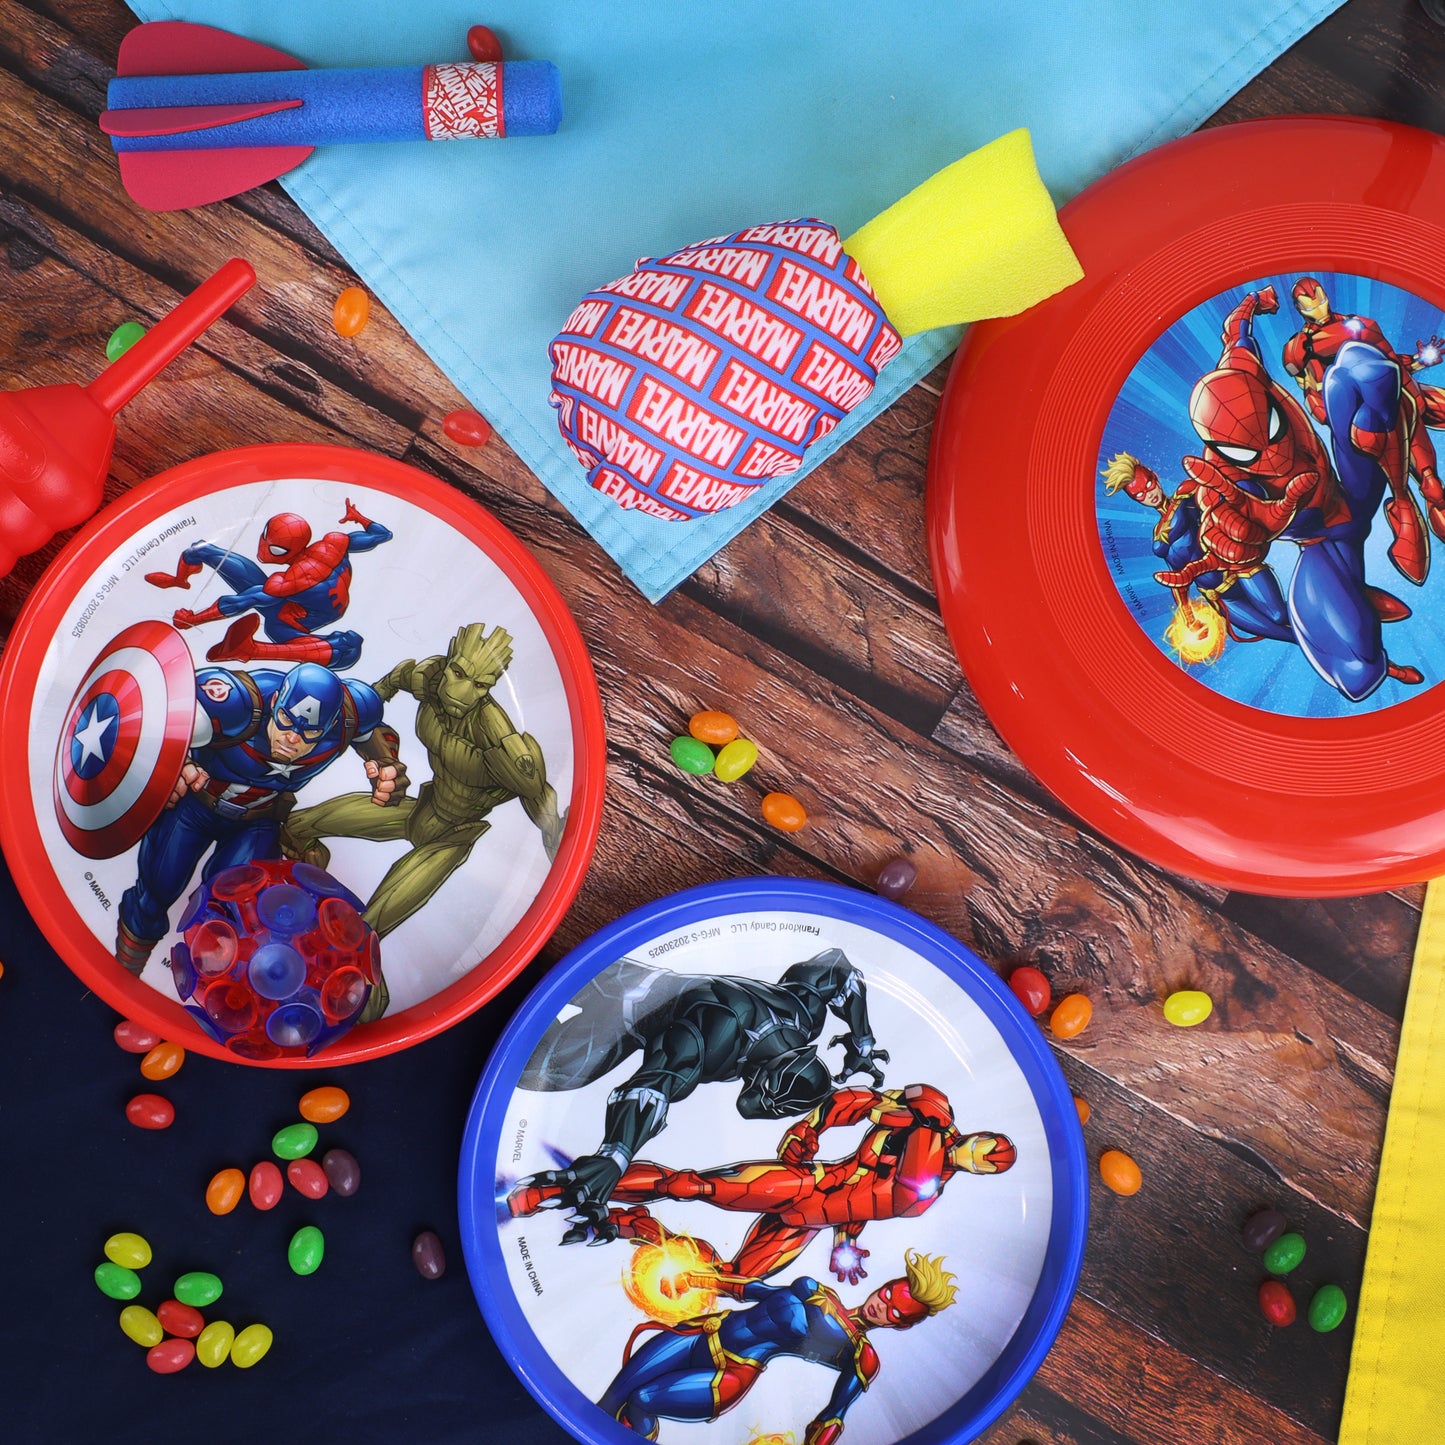 Marvels themed toys with jelly beans